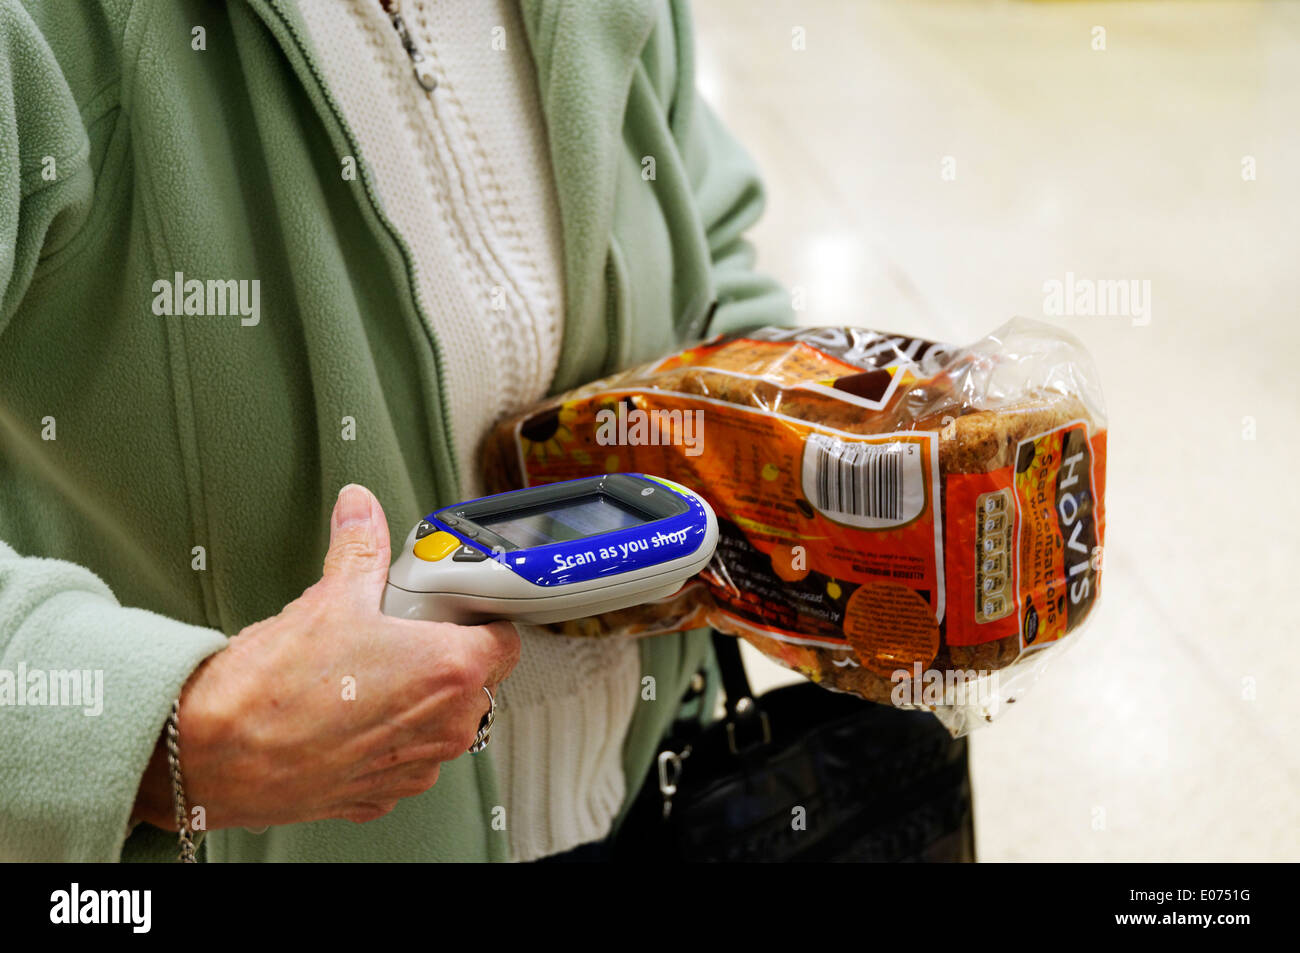 An older woman's hands scanning a loaf of bread in Tesco Scan as you Shop Stock Photo